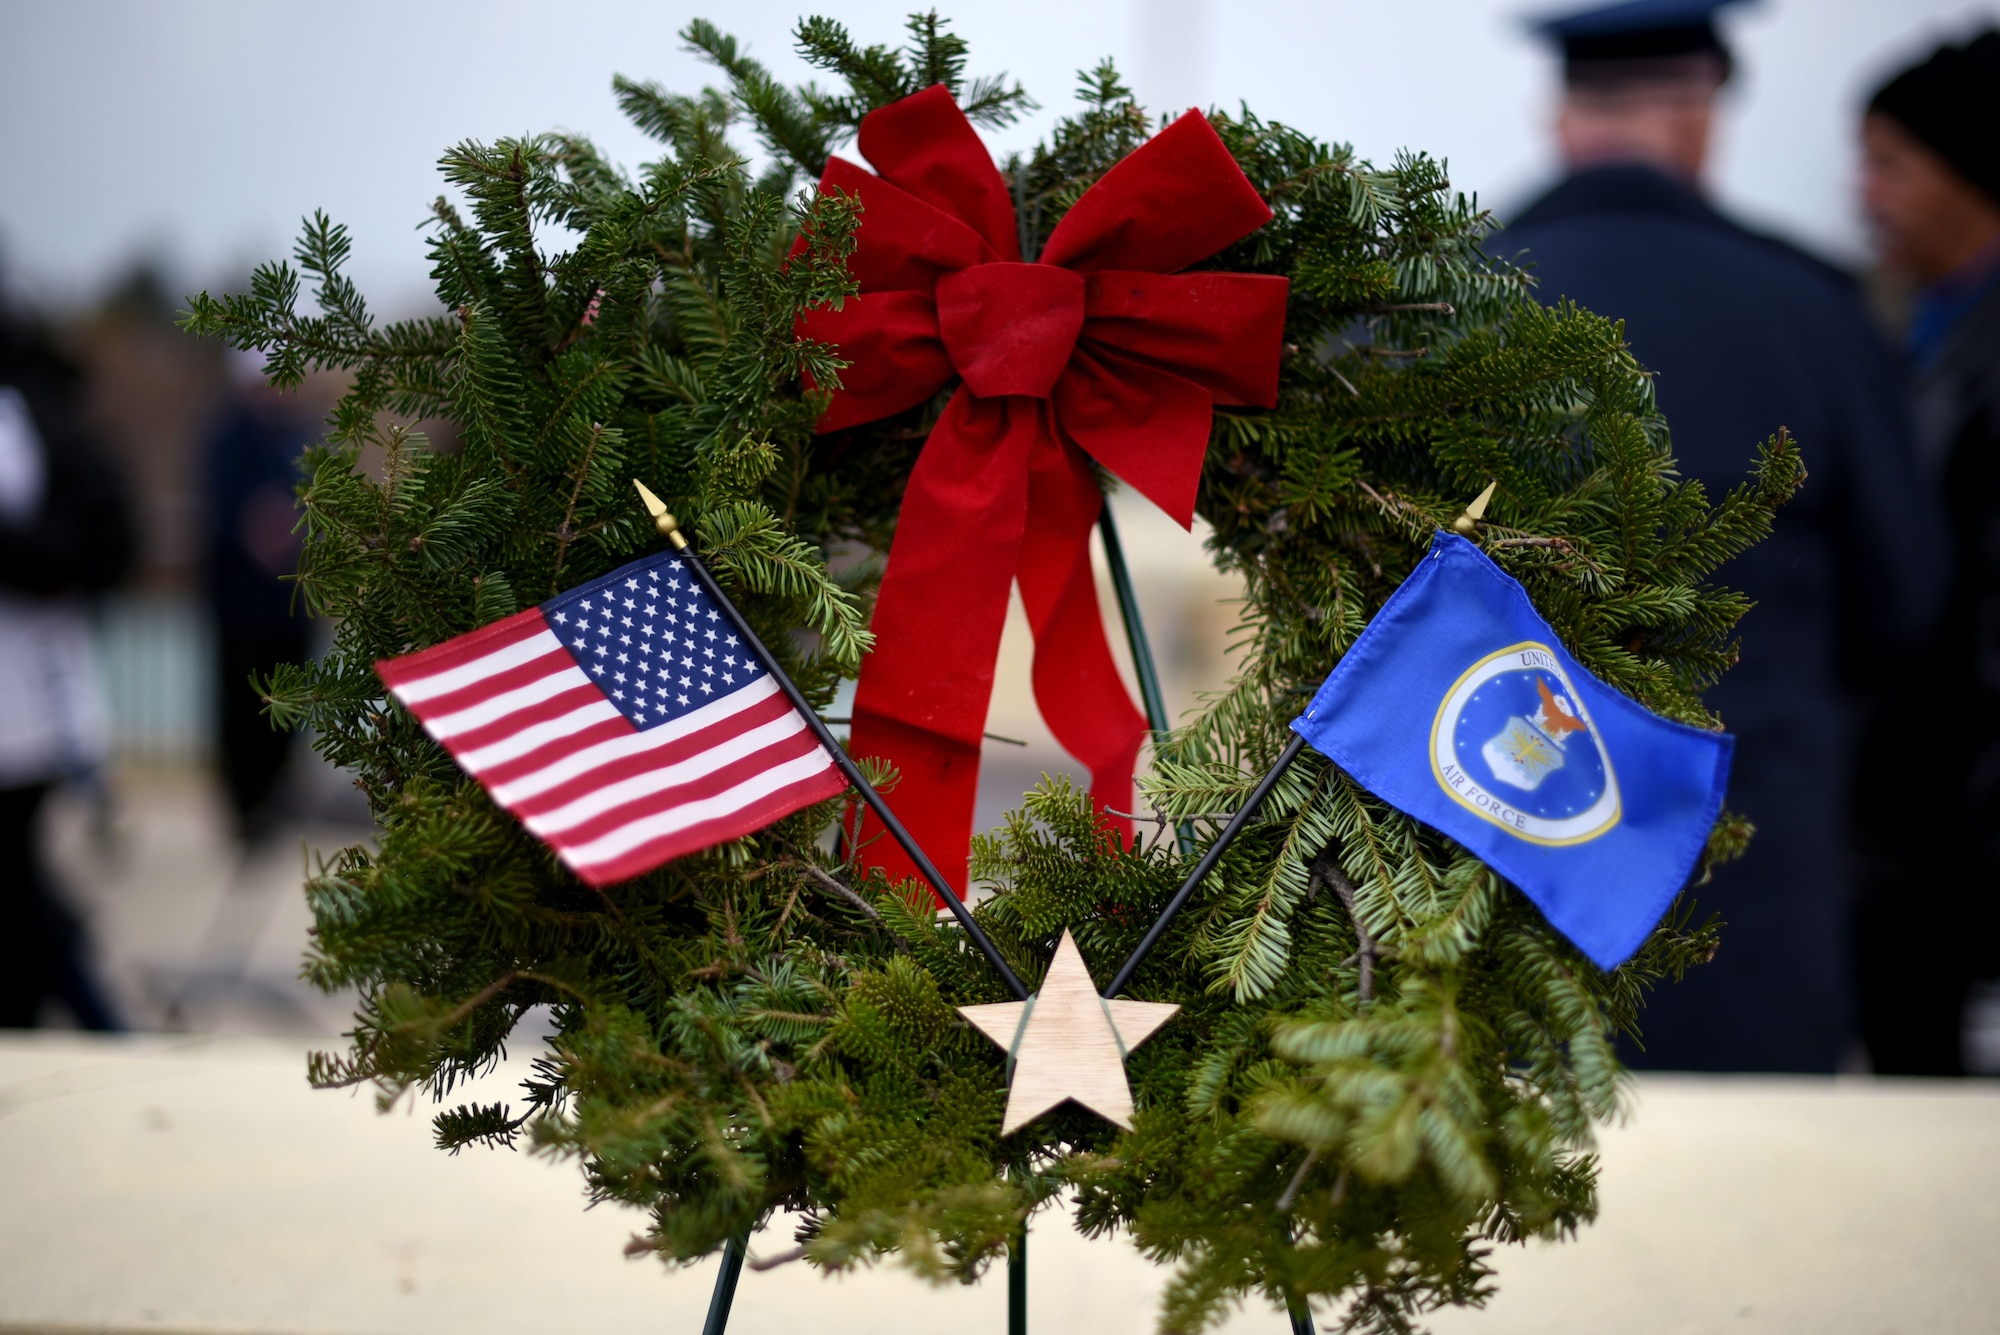 The U.S. Air Force wreath represents deceased Airmen during a Wreaths Across America event at the Dallas-Fort Worth National Cemetery on Dec. 18, 2021. Airmen from the 301st Fighter Wing remembered their fellow service members by distributing and laying wreaths. (U.S. Air Force photo by Staff Sgt. Randall Moose)